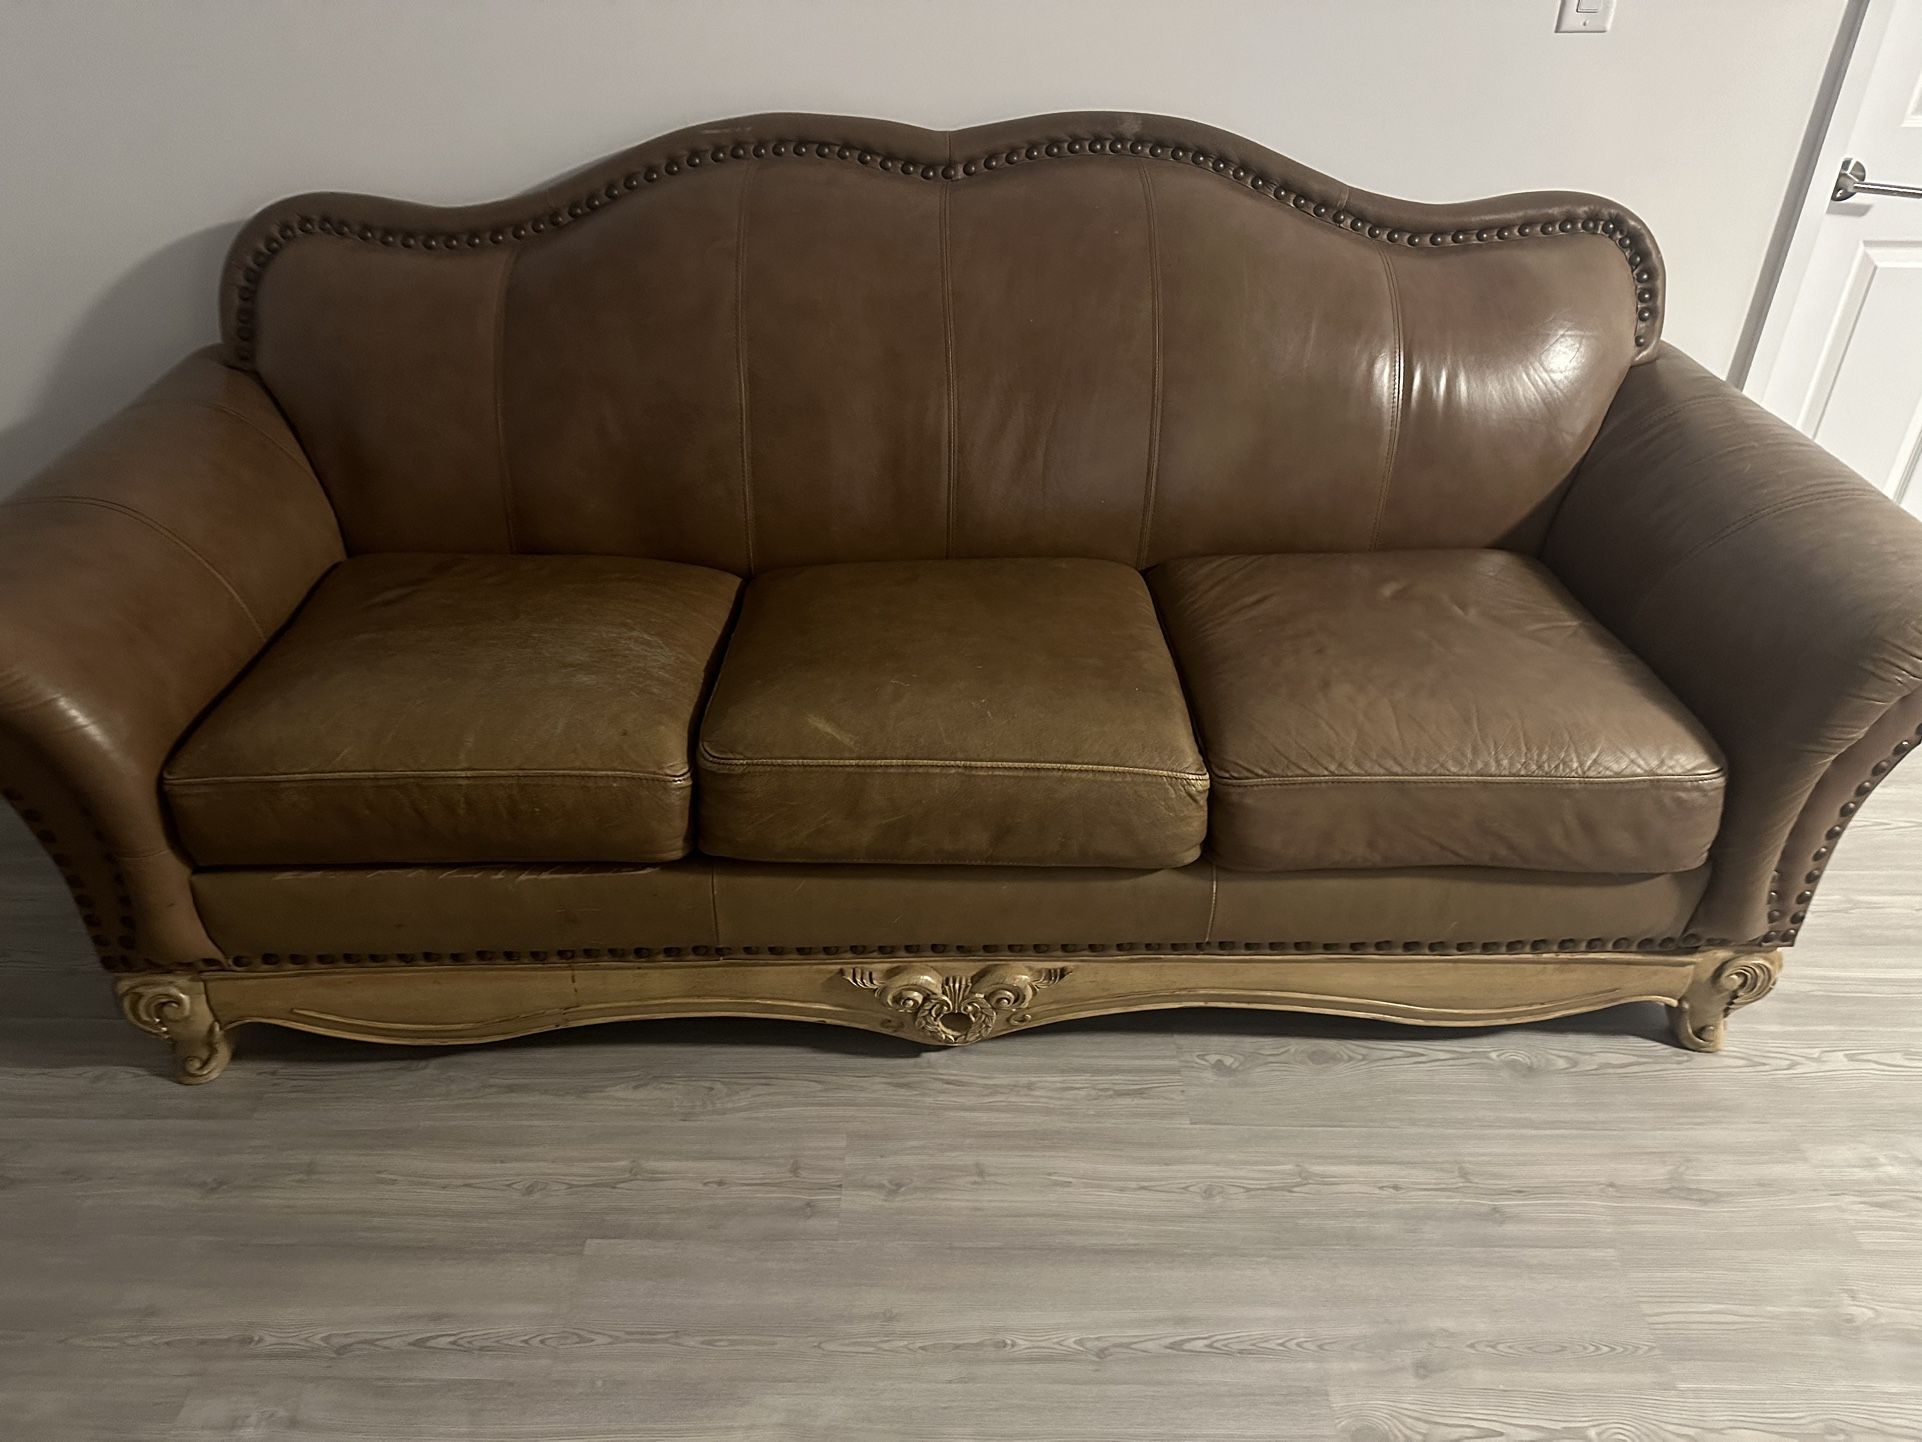 Real Leather Couch And Loveseat $300